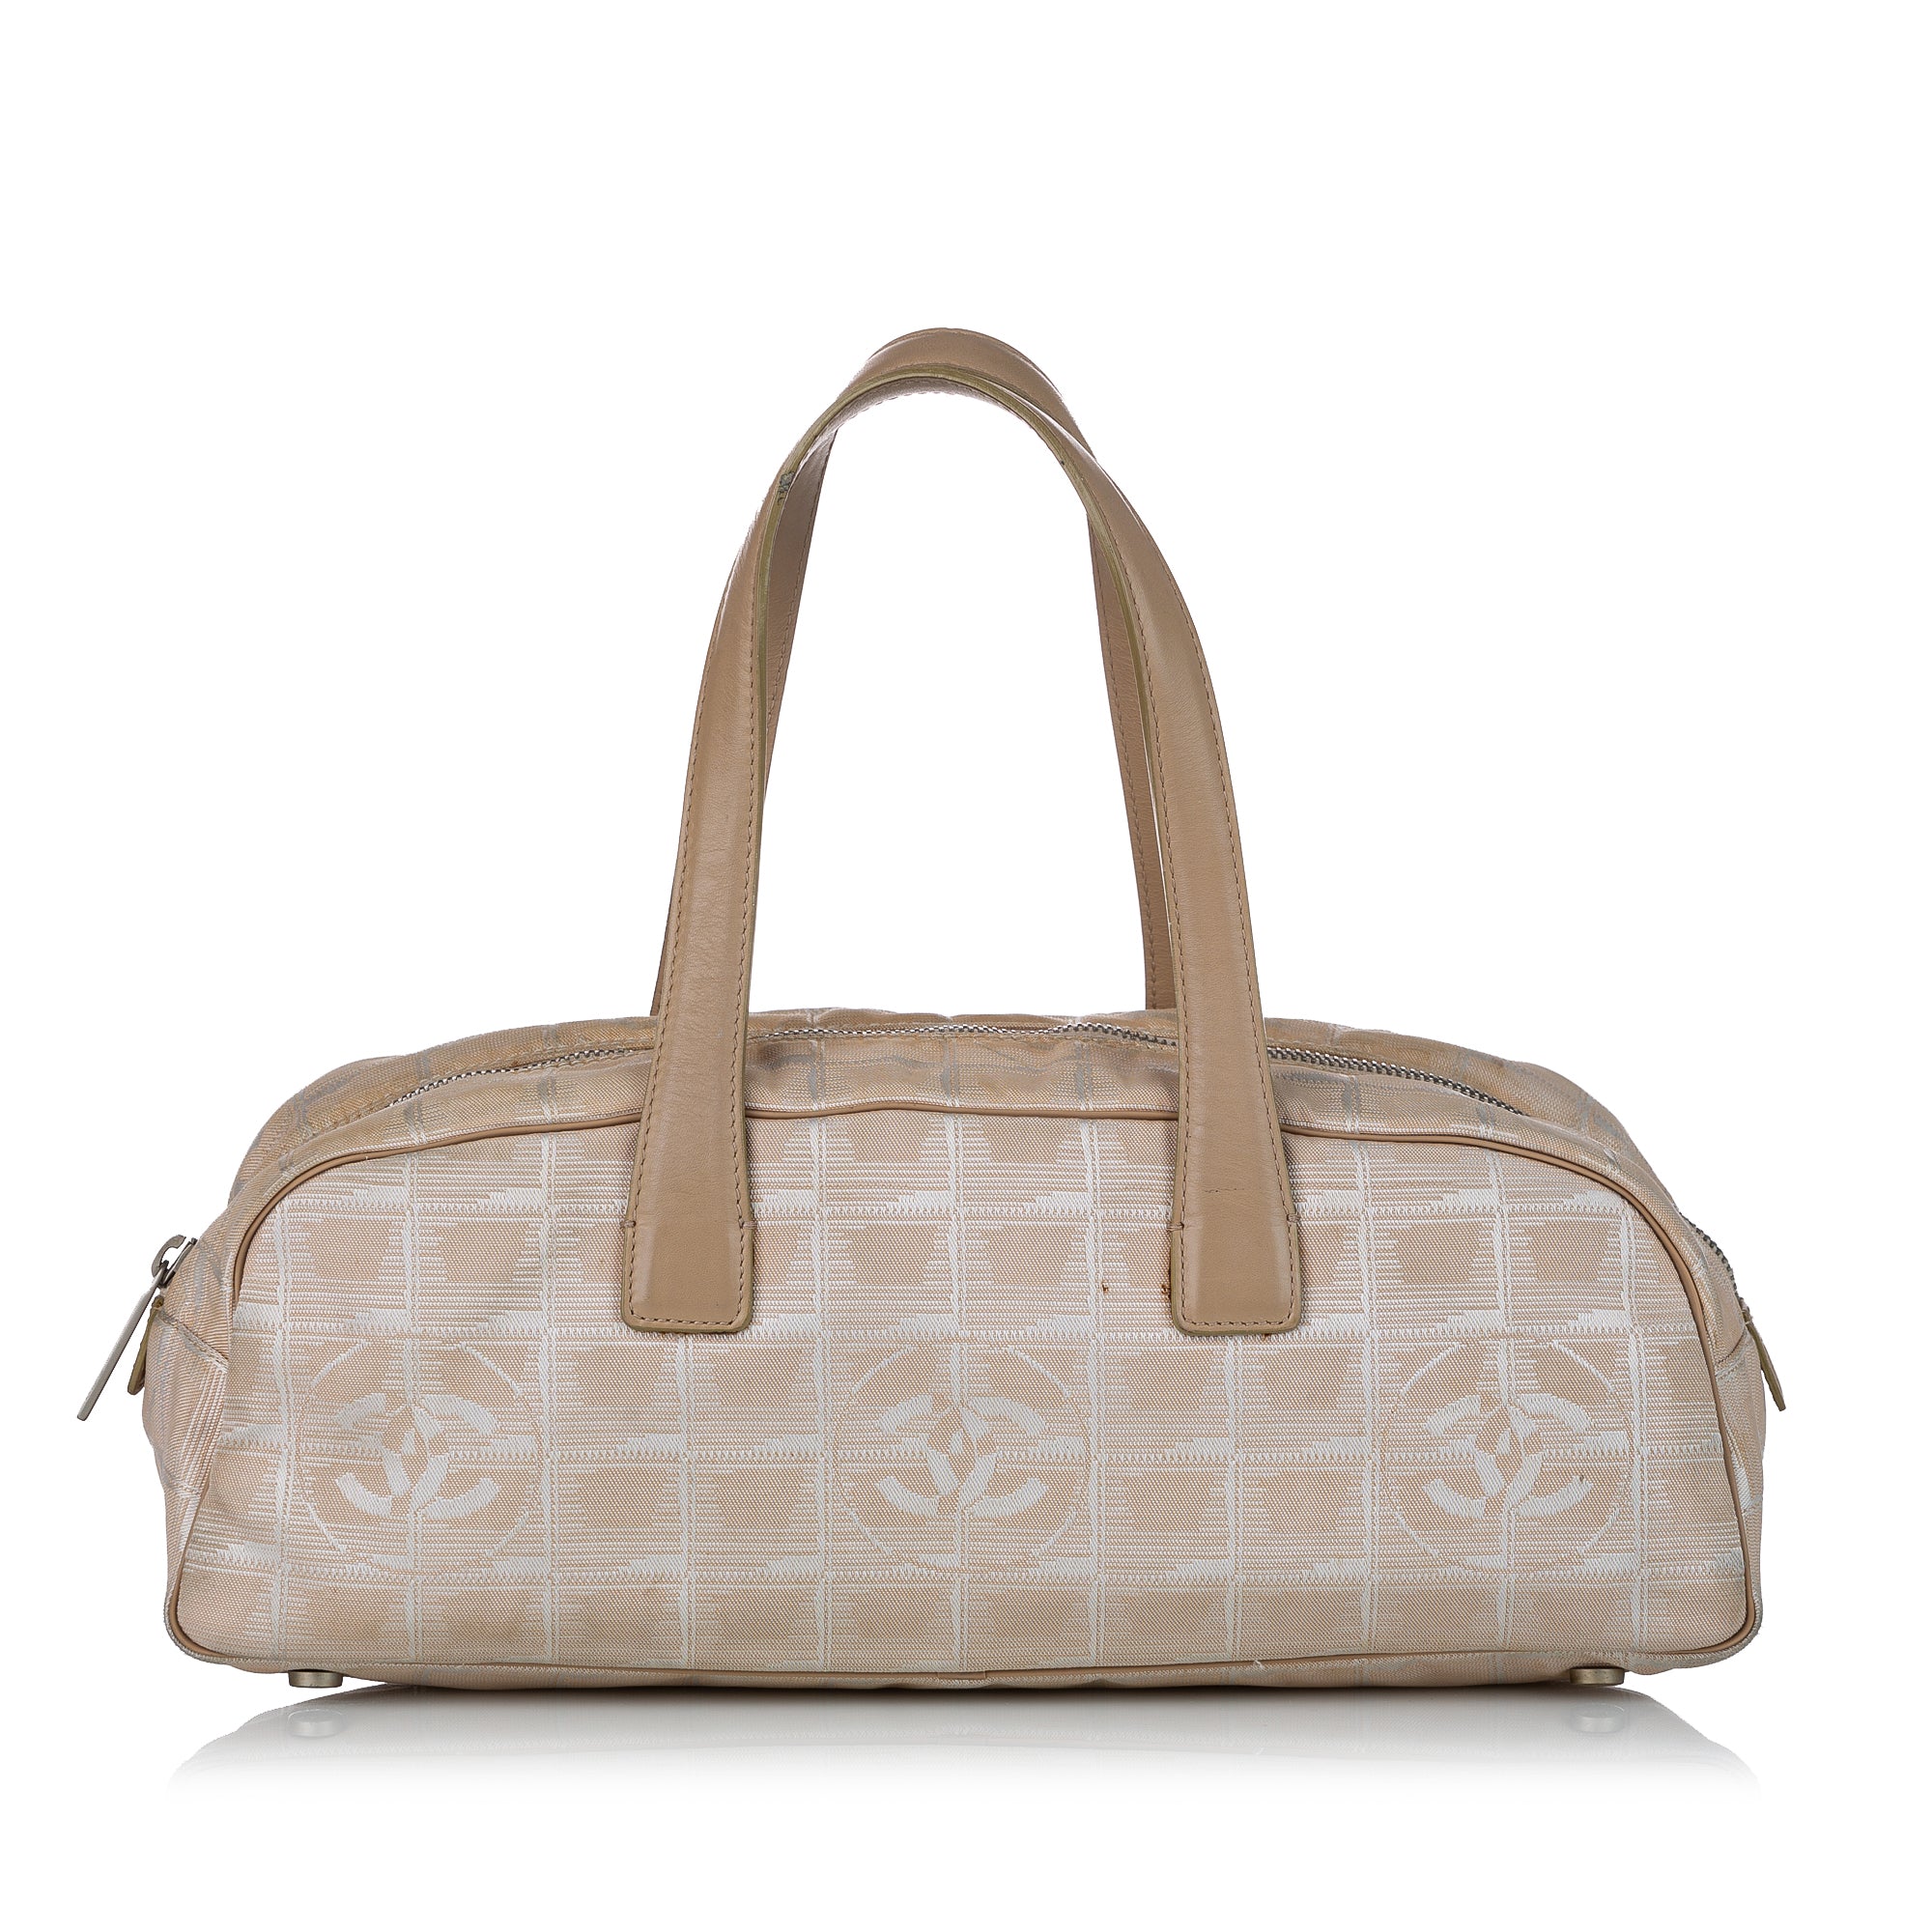 CHANEL, Bags, Chanel Travel Line Tote